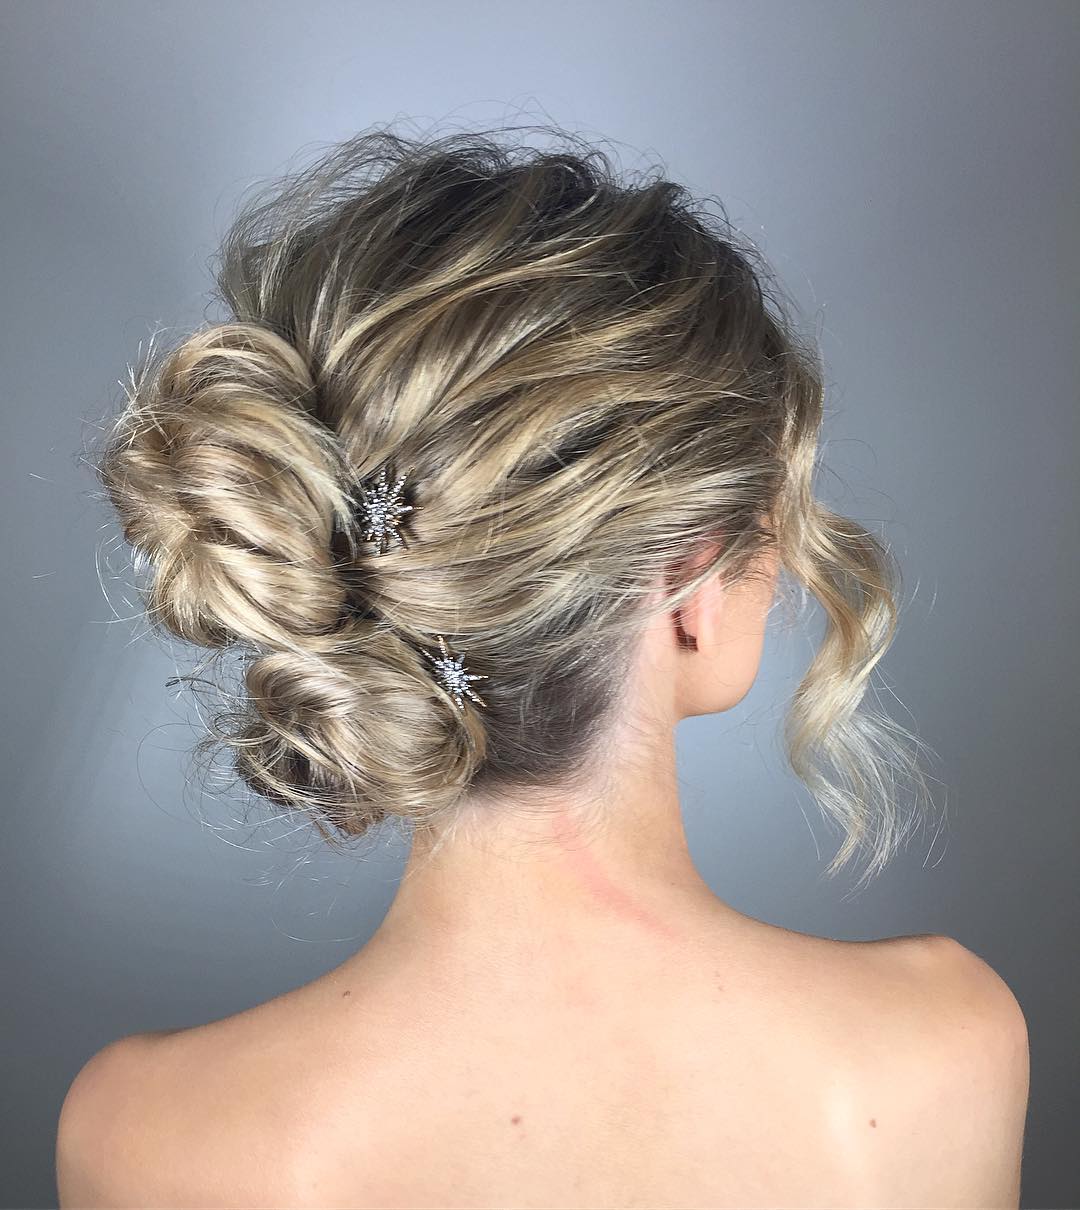 Textured Do With Double Mini Buns